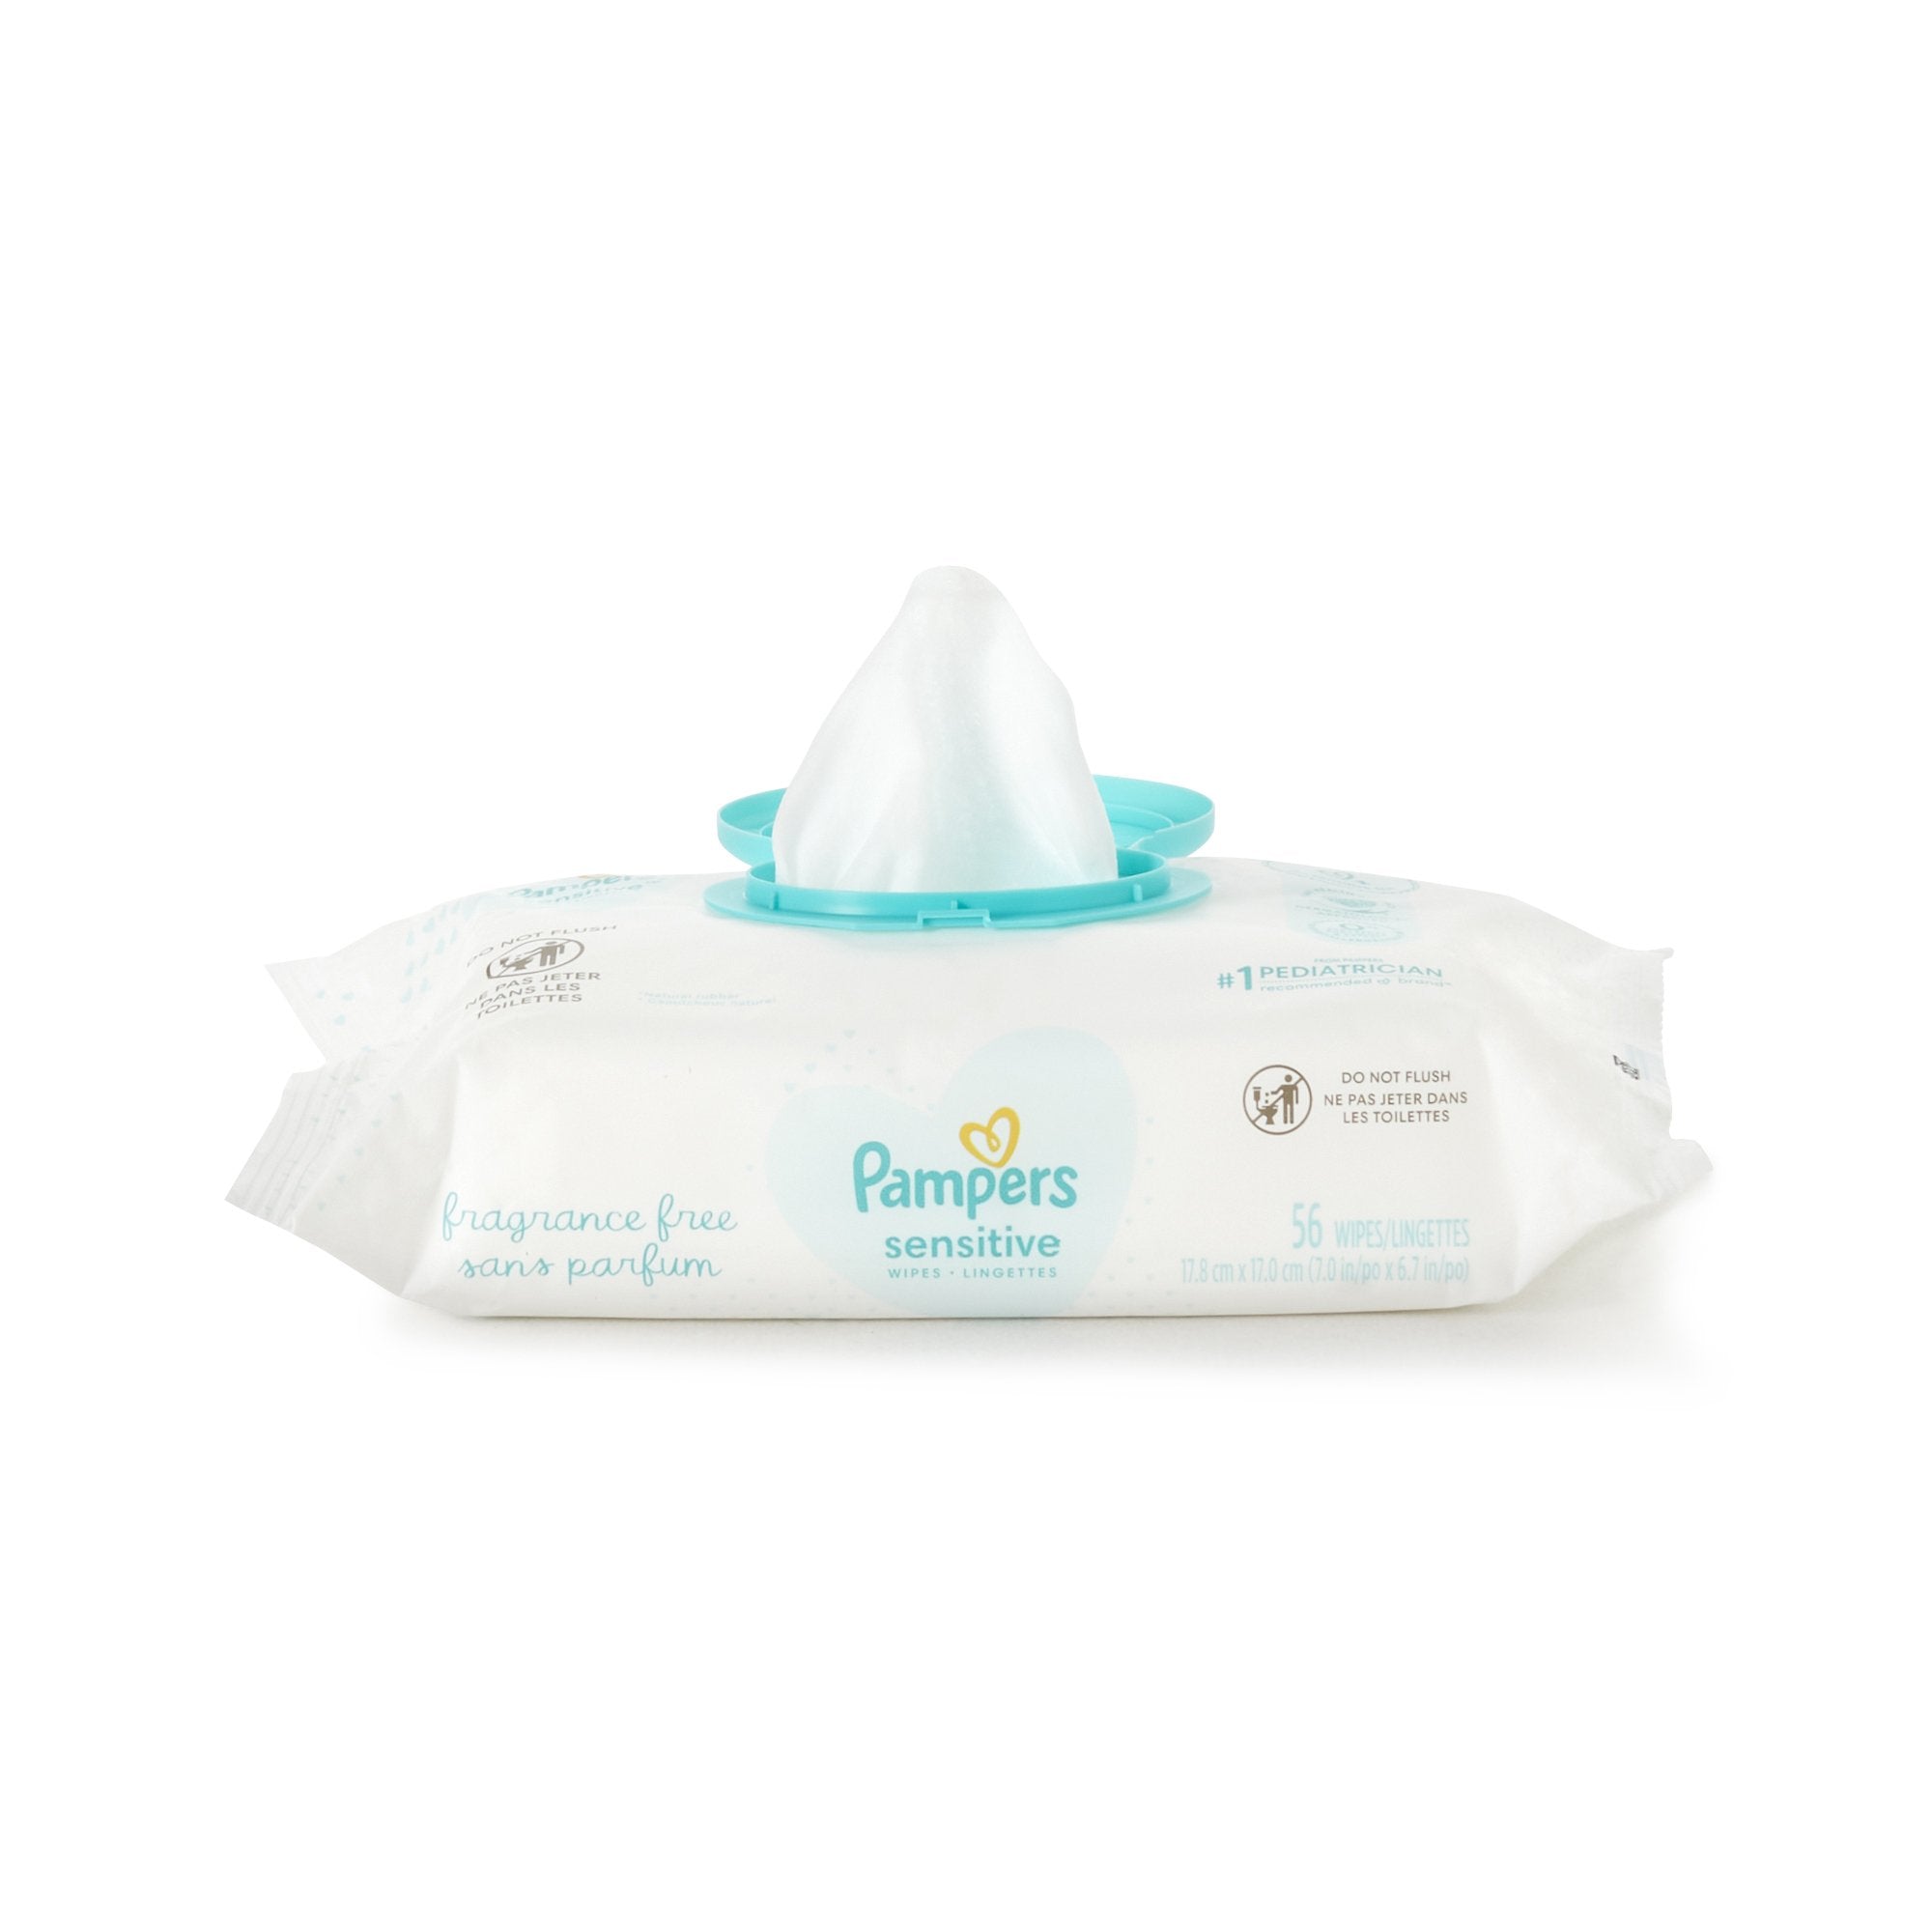 Pampers® Sensitive™ Wipes